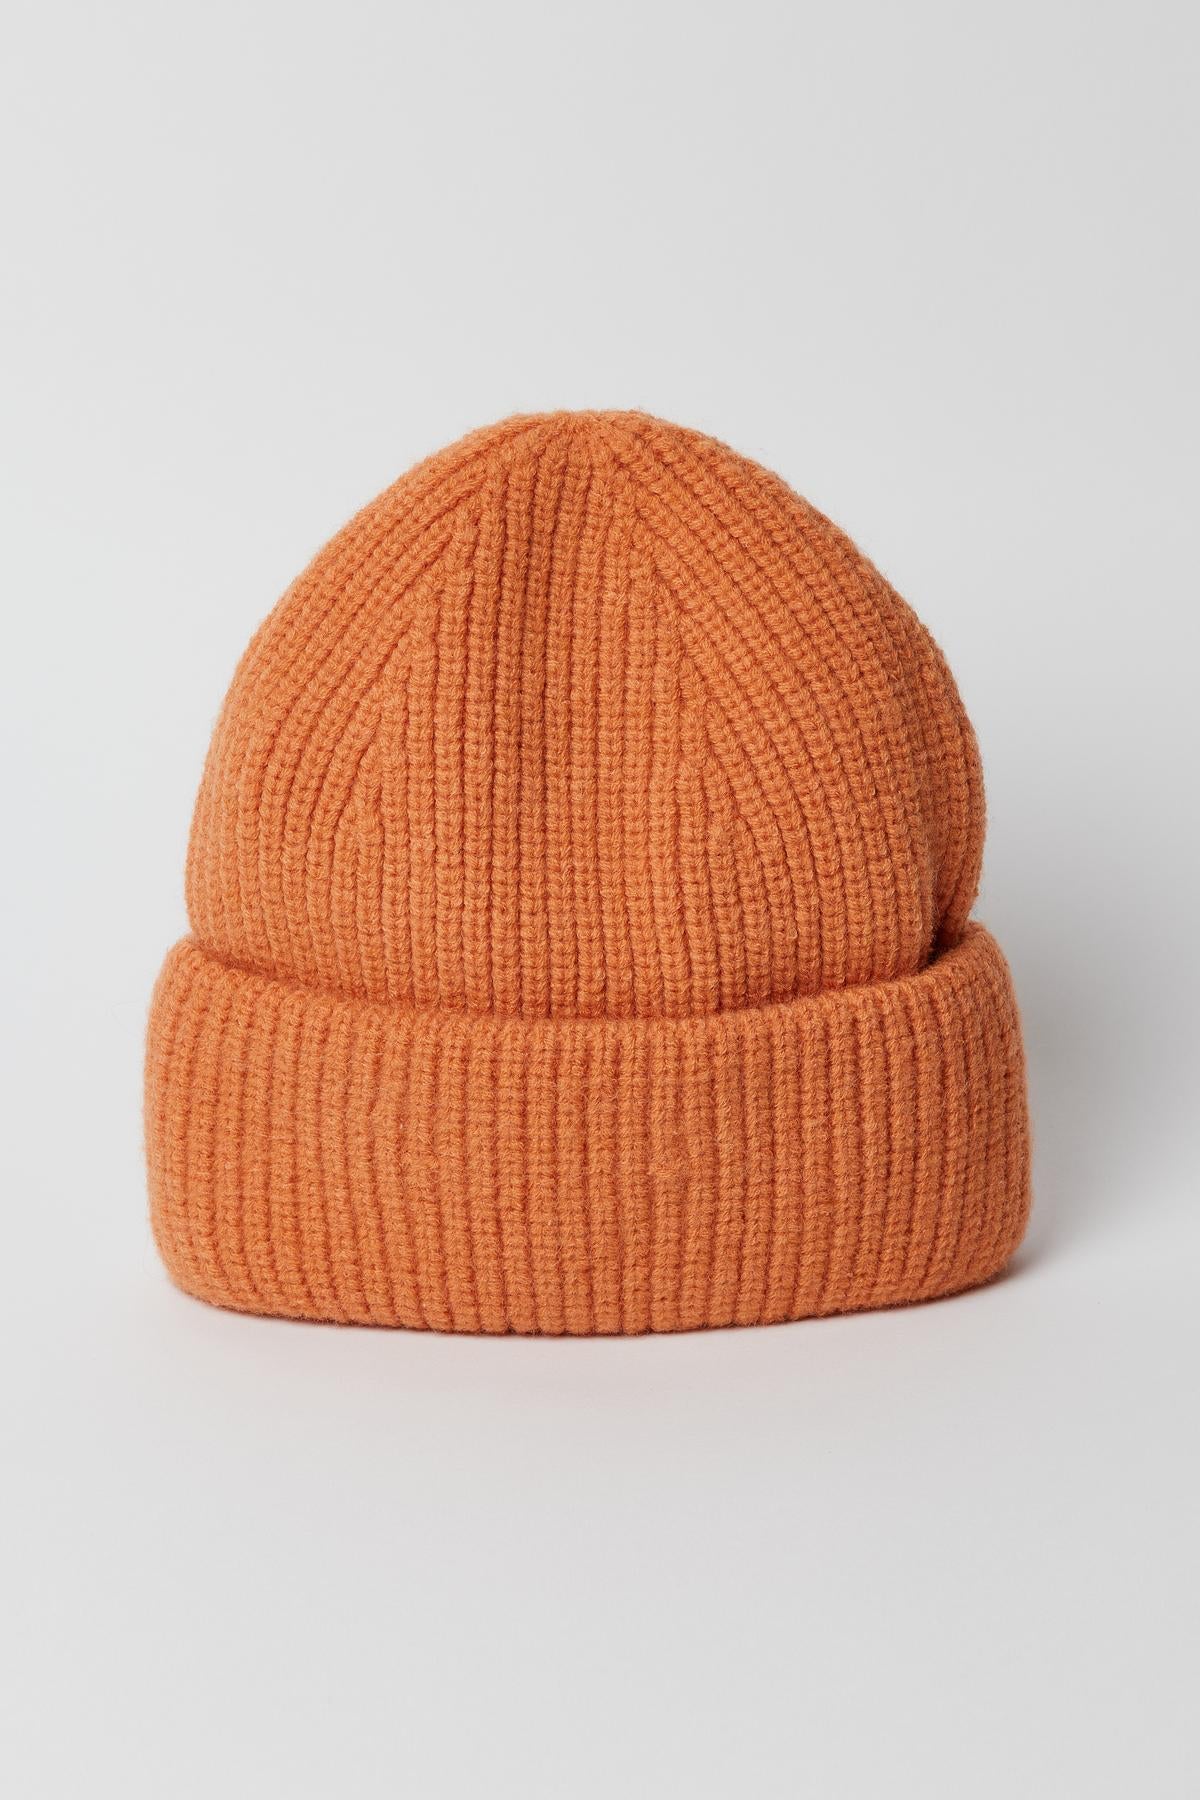 A comfortable orange MAJOR BEANIE by Velvet by Graham & Spencer, perfect for winter weather, on a white background.-35211058282689